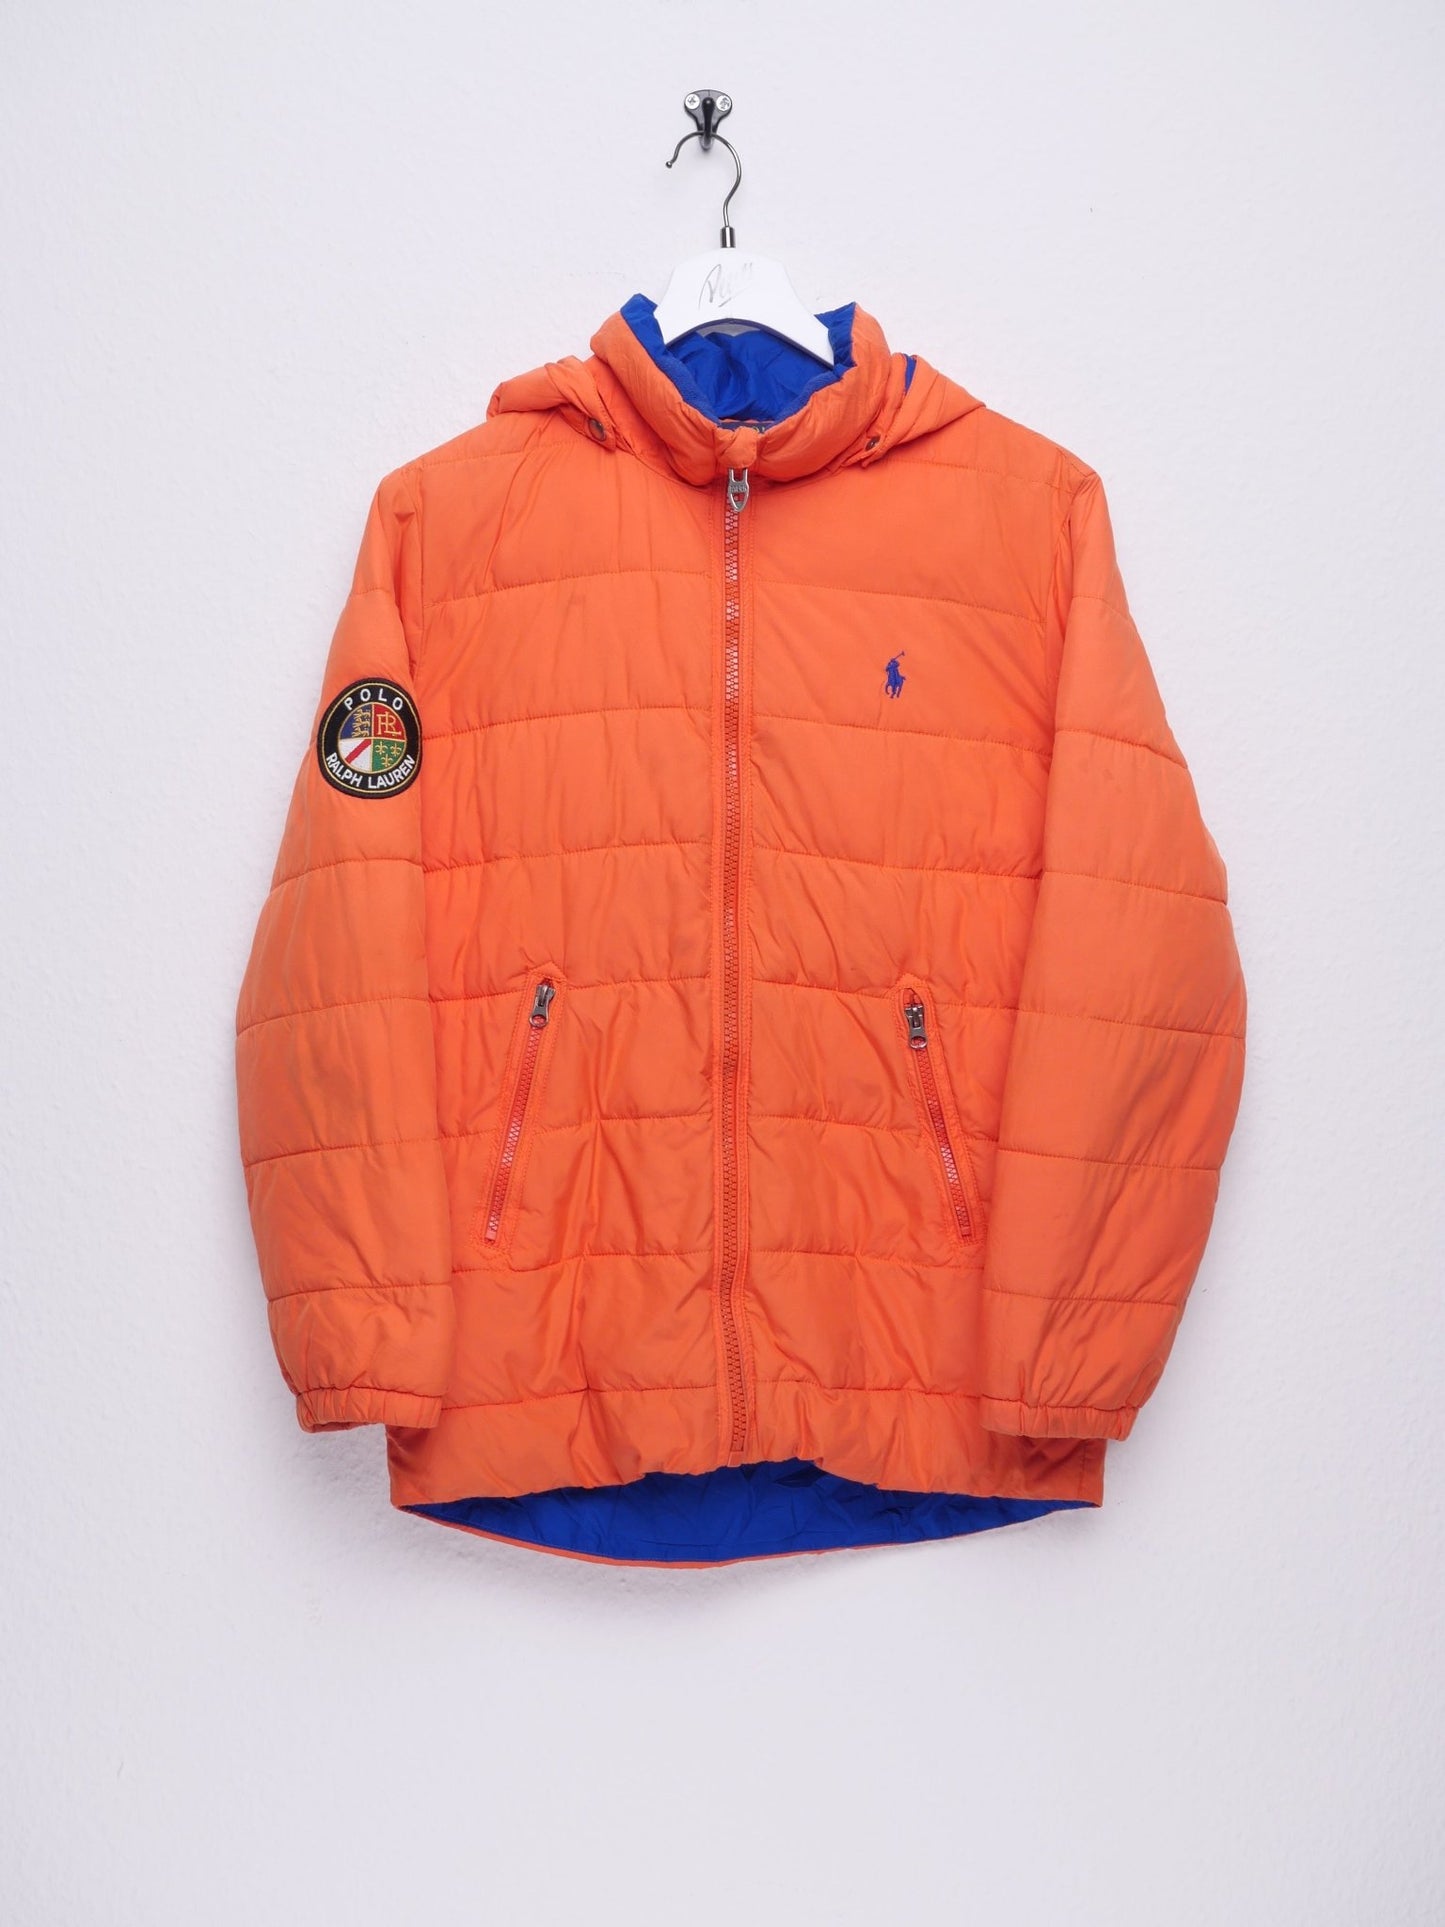 Polo Ralph Lauren embroidered Logo Vintage Puffer Jacket - Peeces